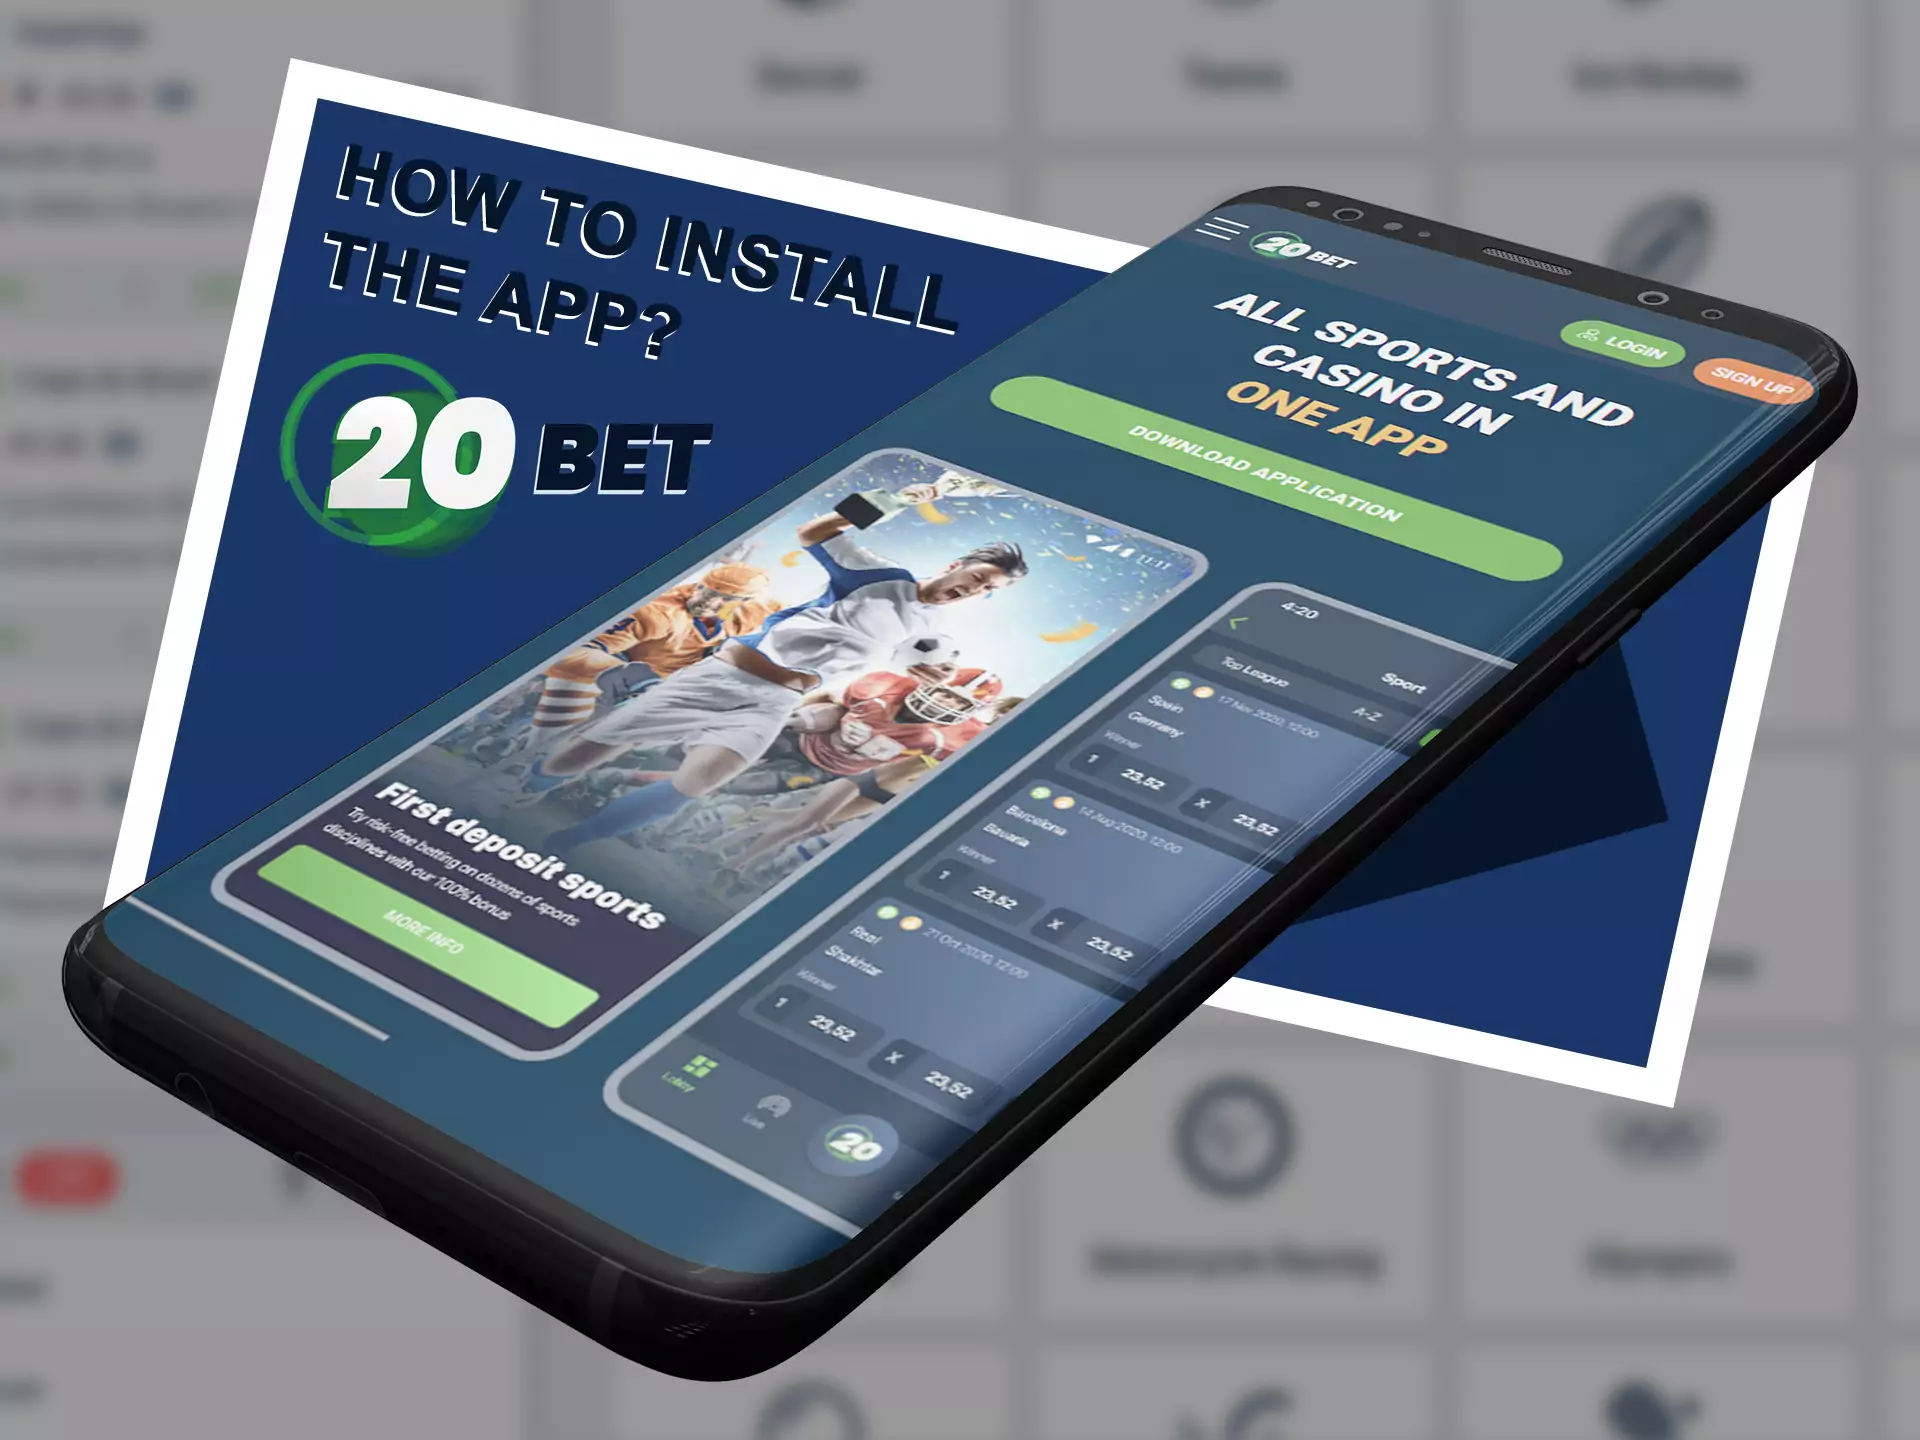 Installation of 20bet app is very easy.